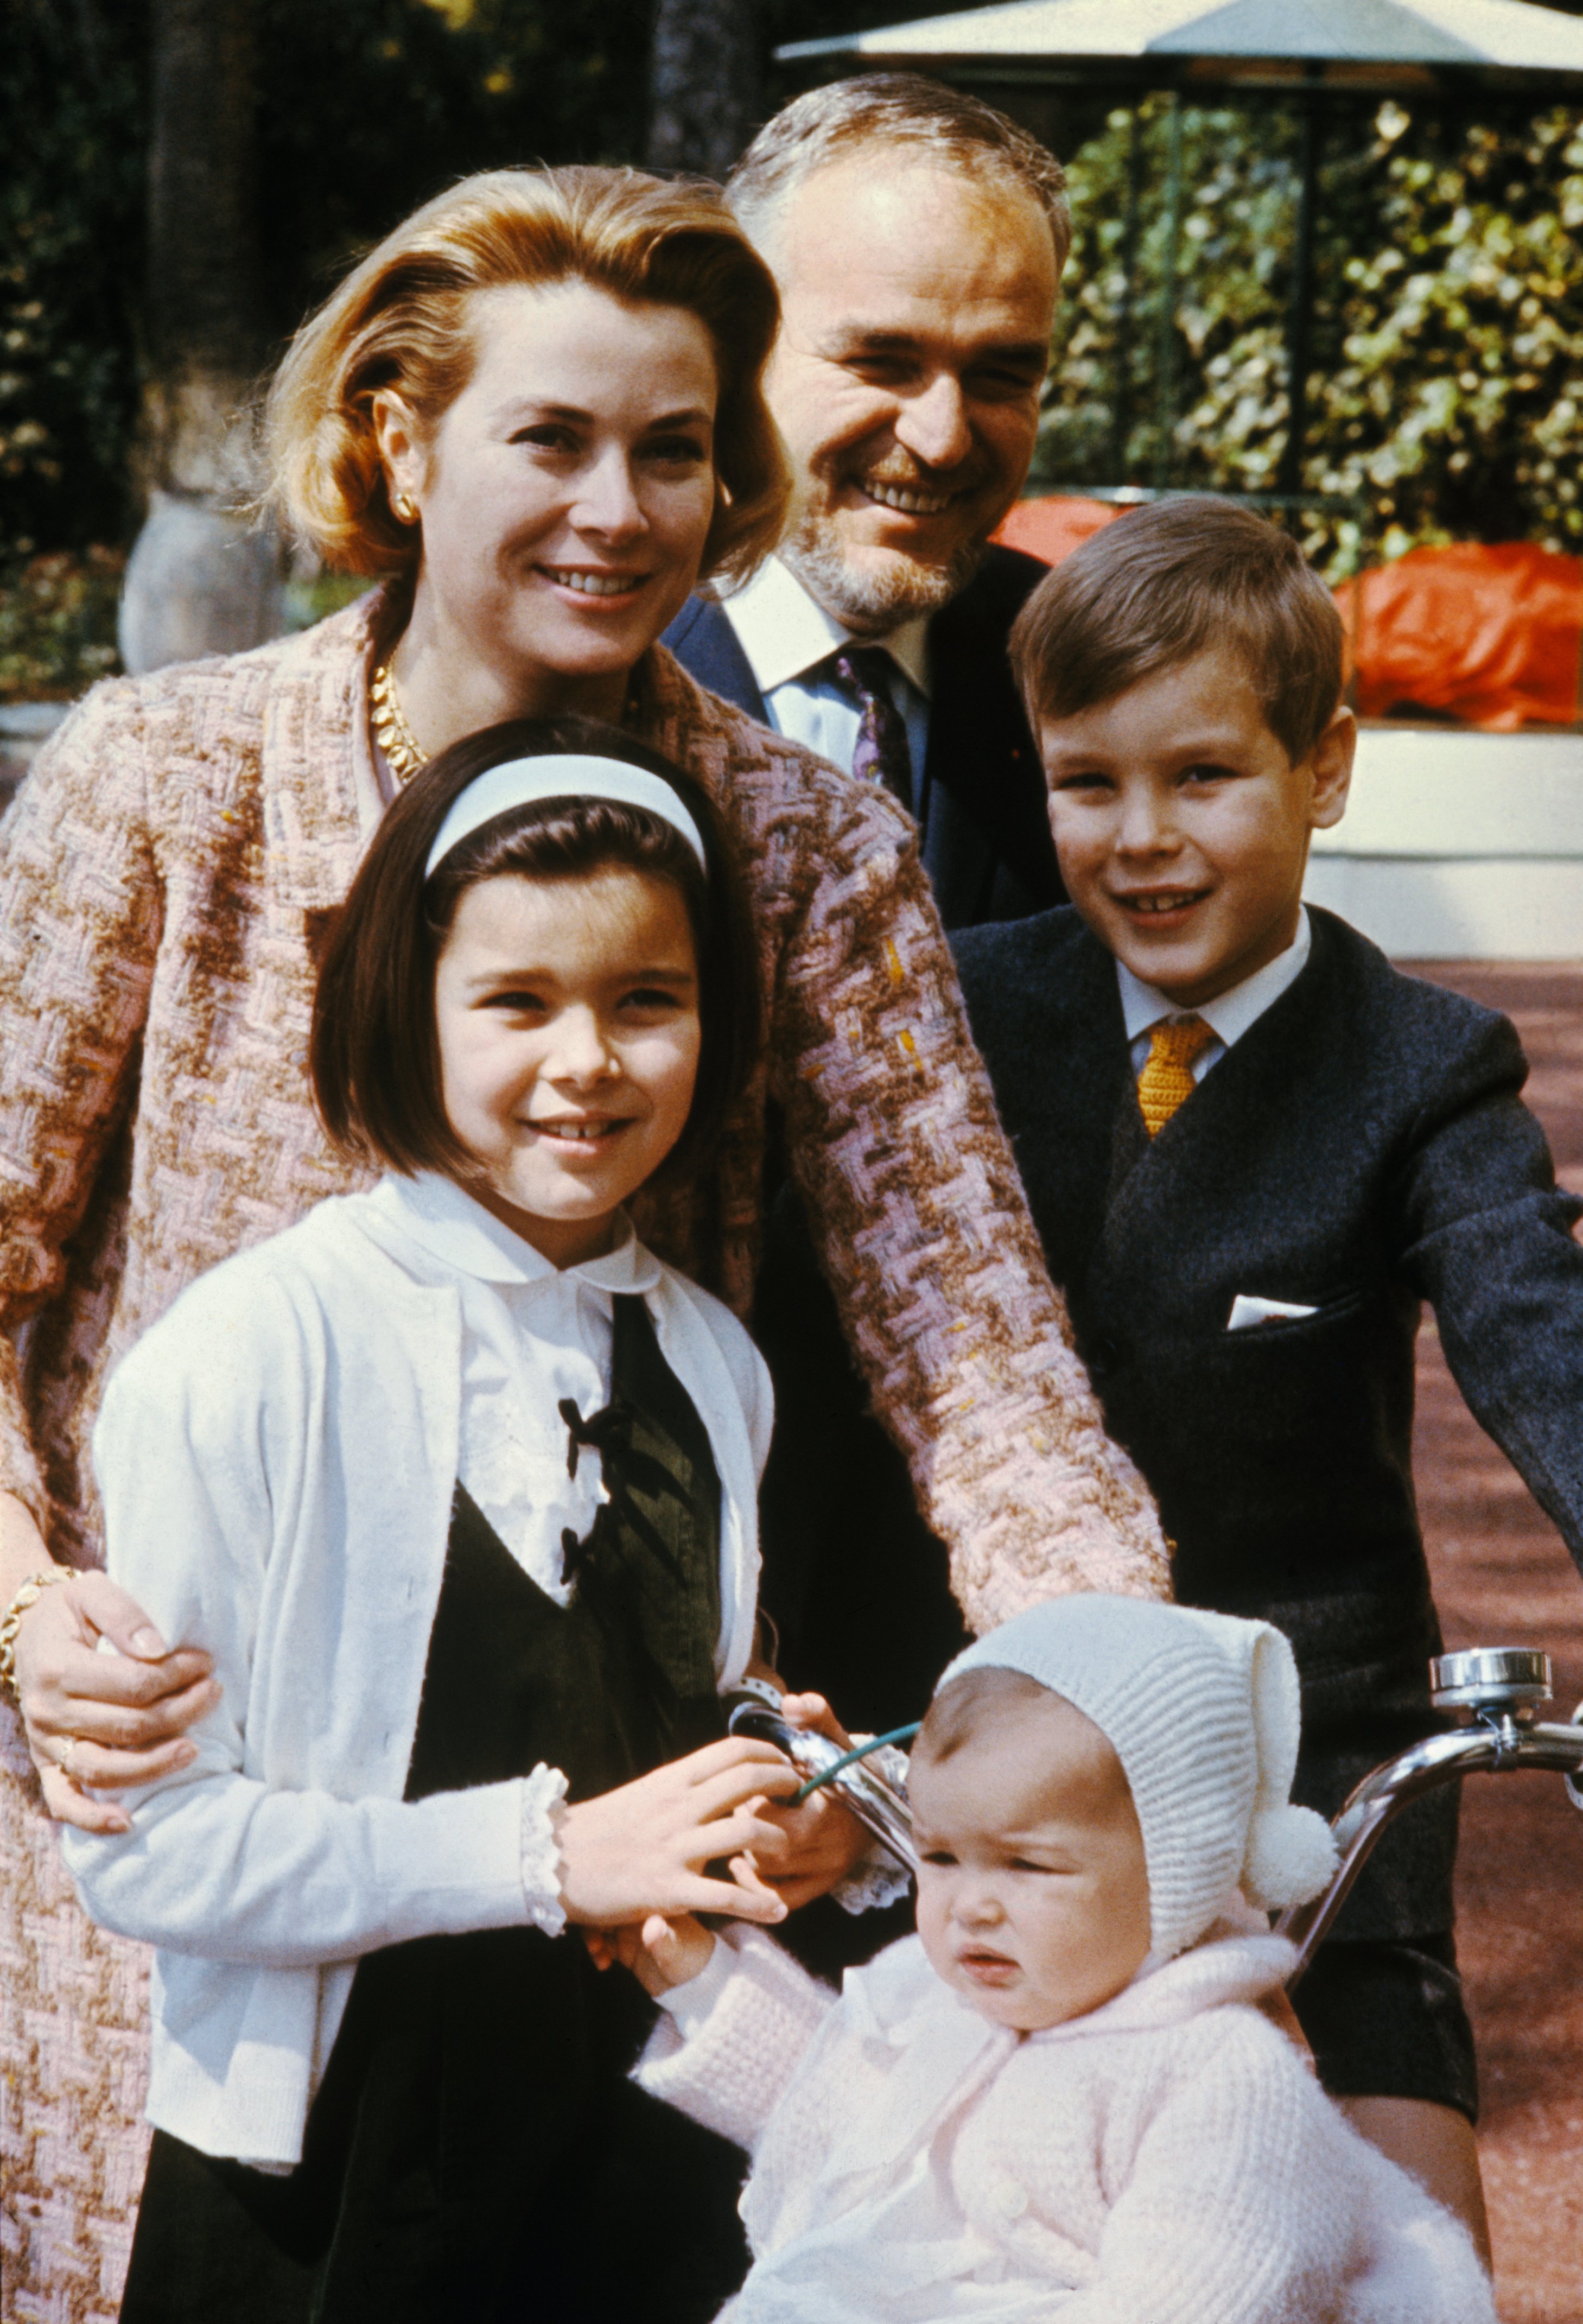  Prince Rainier and Princess Grace, with their youngsters Princess Stephanie, 14 months, Princess Caroline, 9, and Prince Albert, 8 at their palace in 1966  | Source: Getty Images